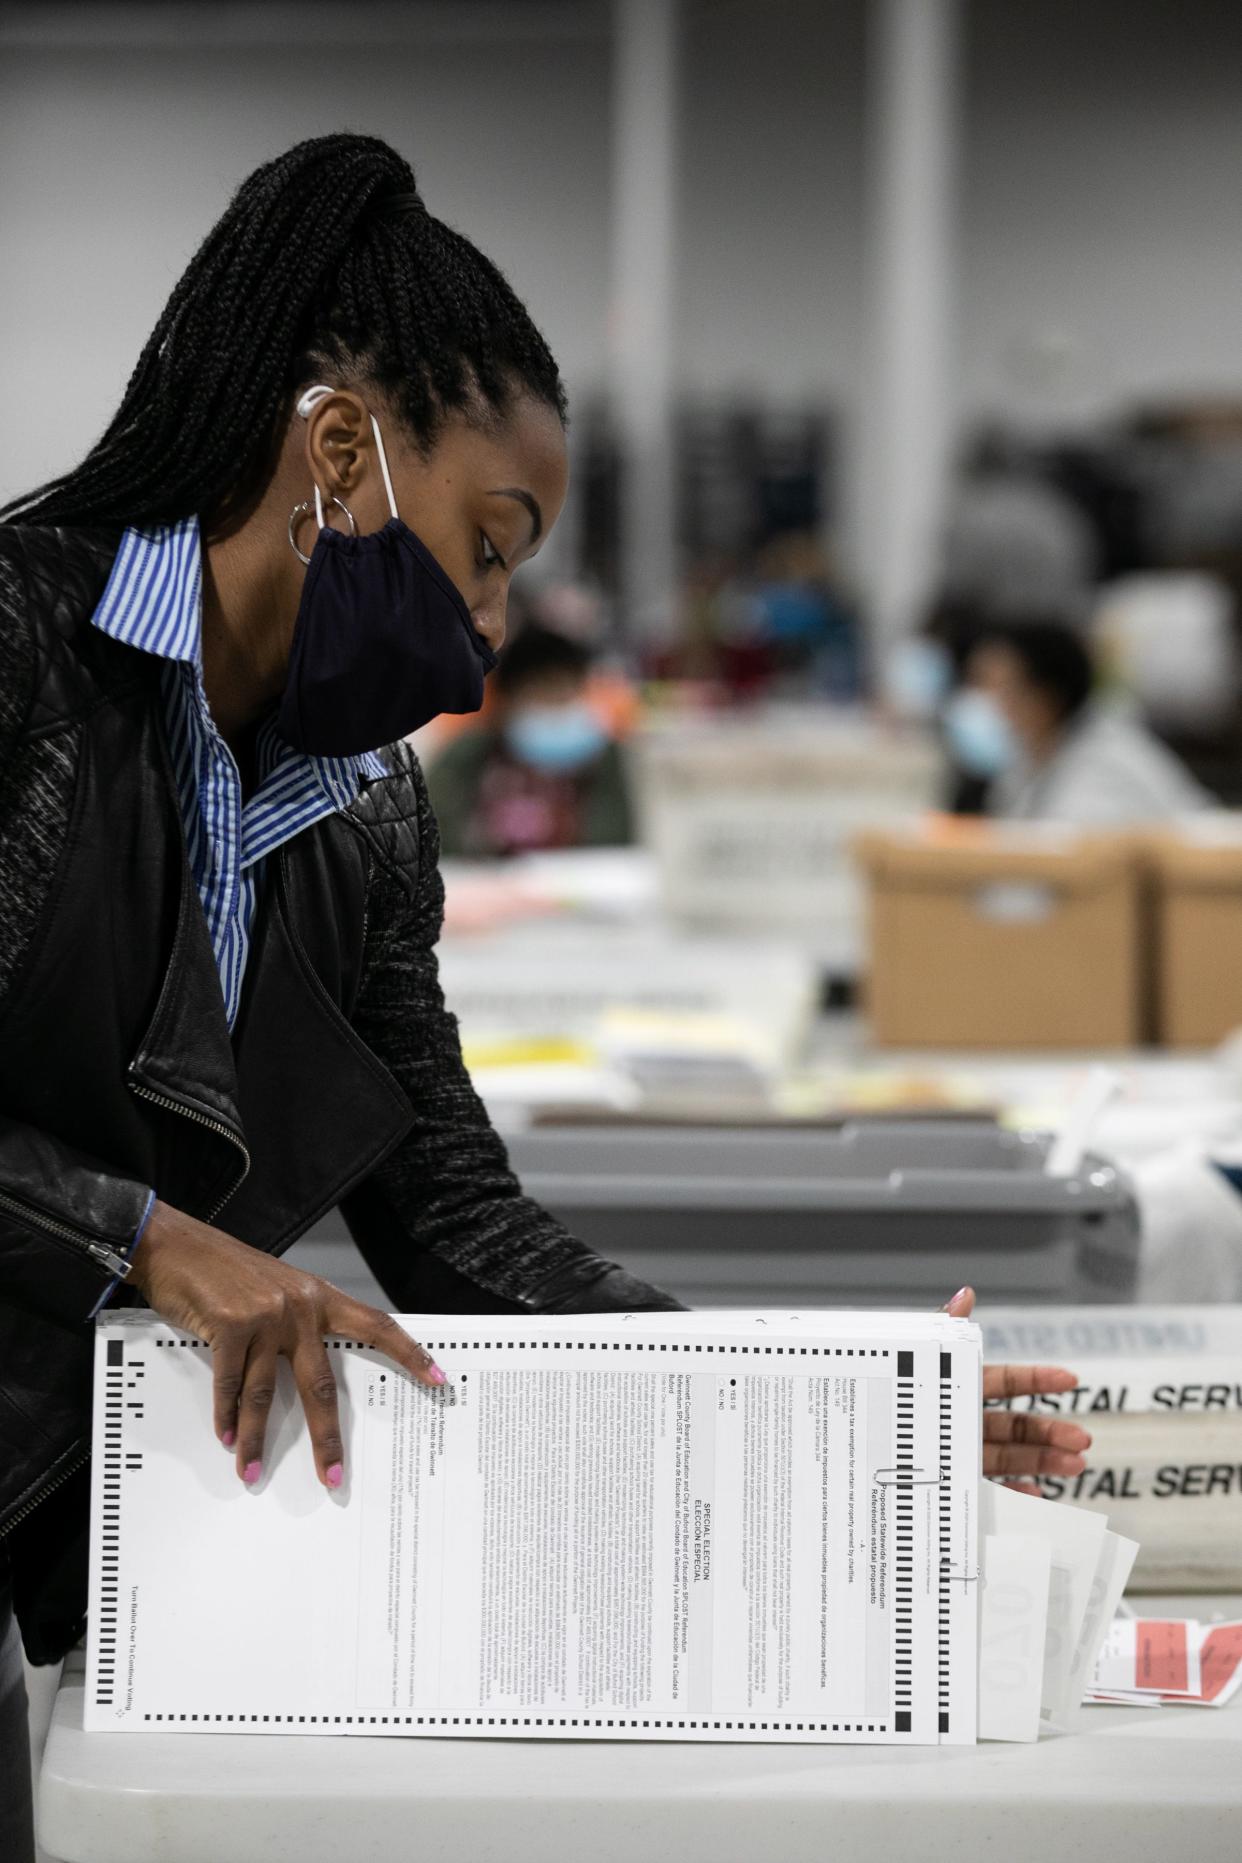 A Gwinnett County election worker processes absentee and provisional ballots on November 6, 2020 in Georgia.